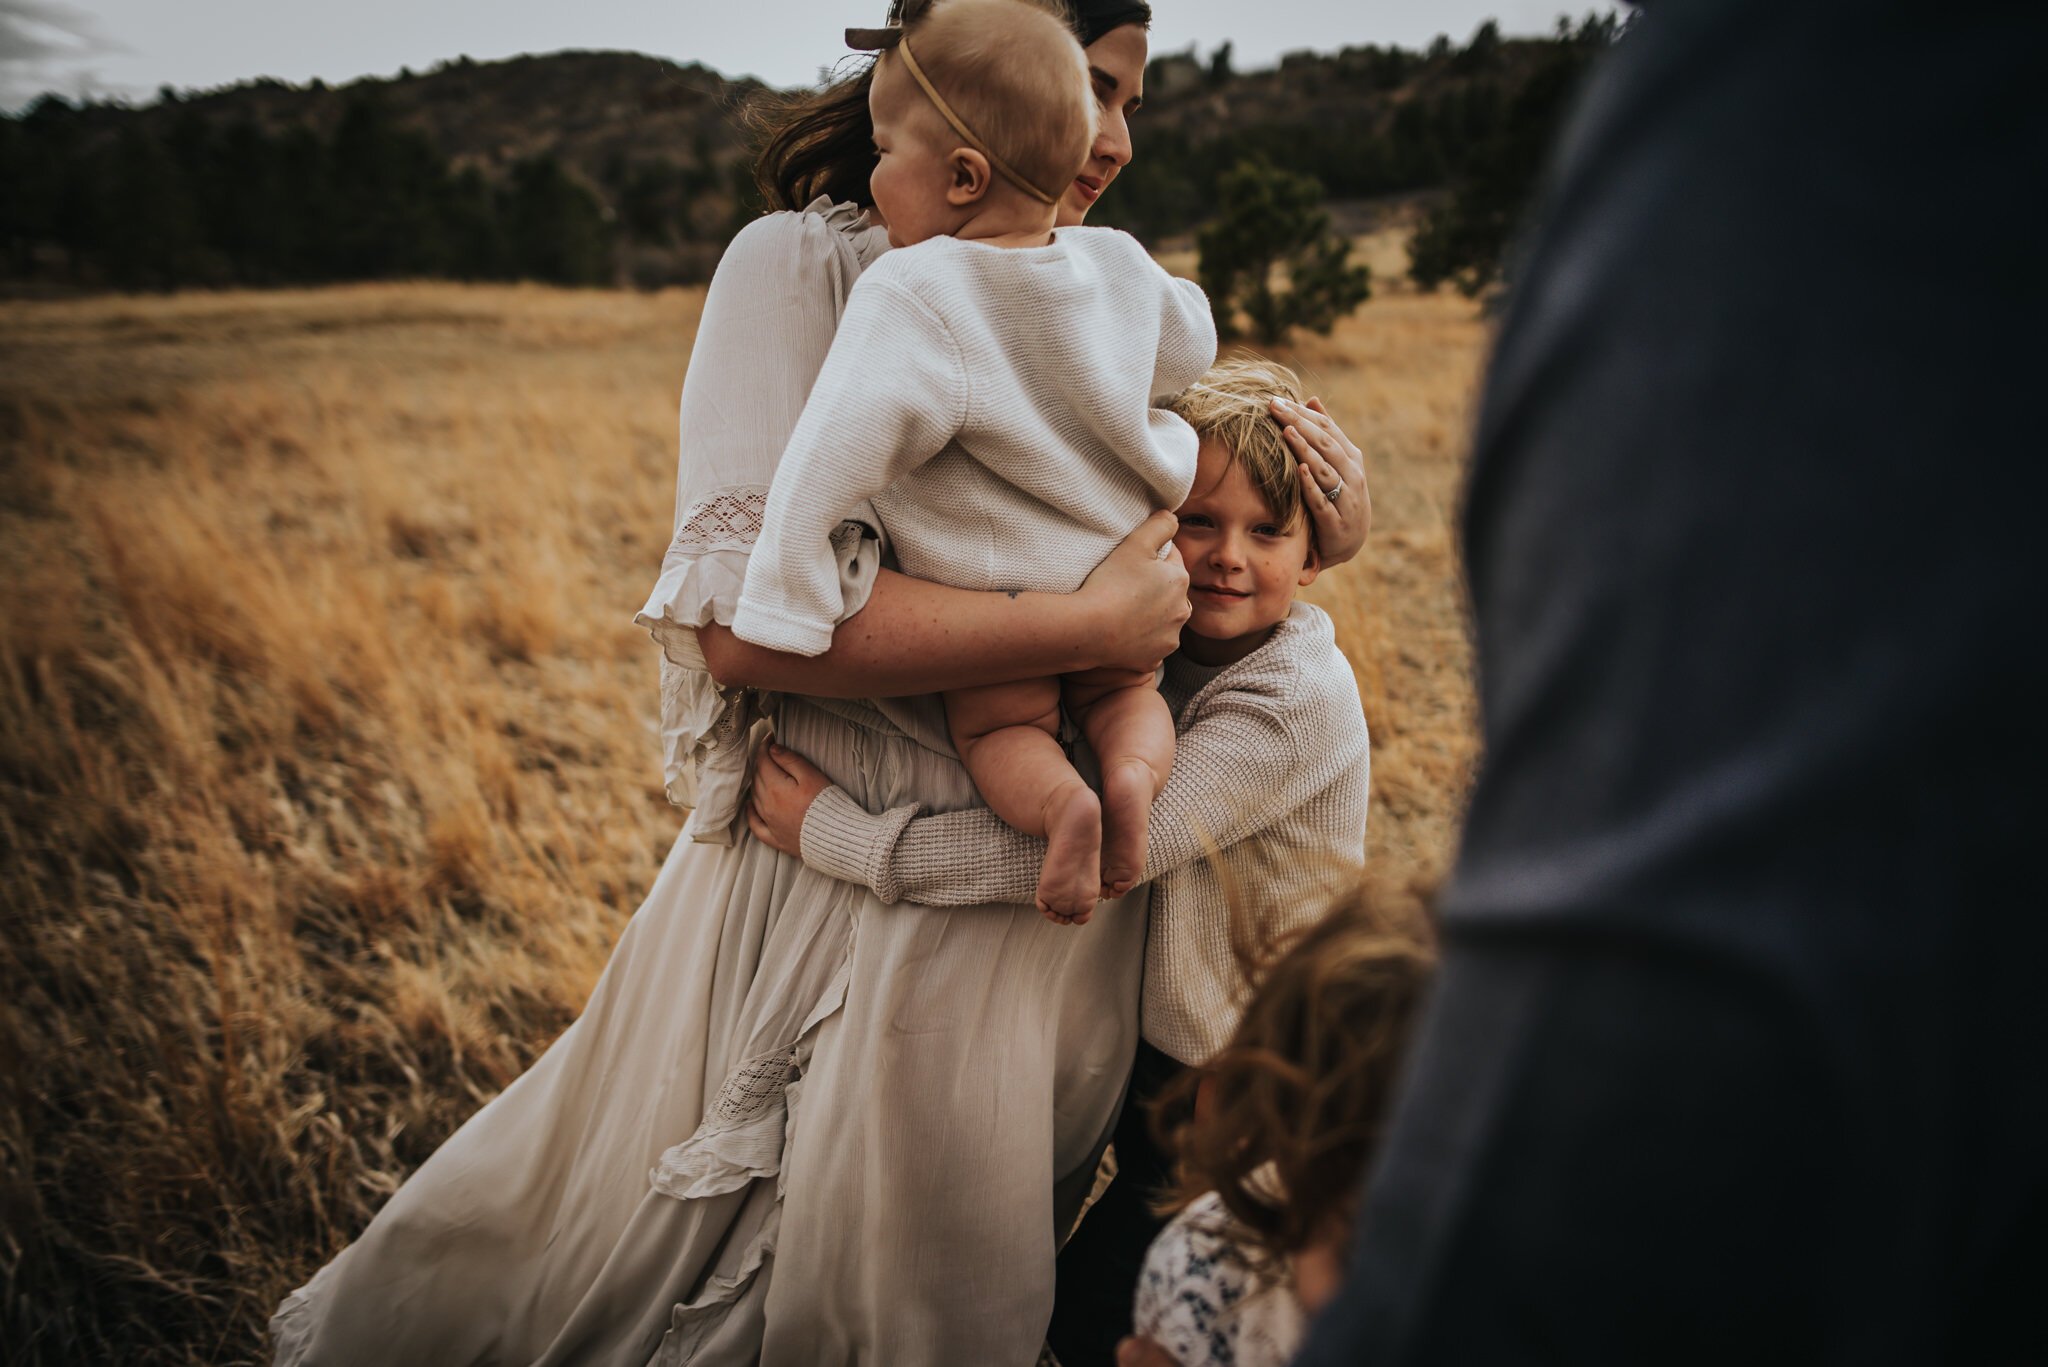 Miller+Family+Session+Mentorship+Colorado+Springs+Colorado+Sunset+Ute+Valley+Park+Mountains+Fields+Mom+Dad+Son+Daughter+Baby+Wild+Prairie+Photography-13-2020.jpeg